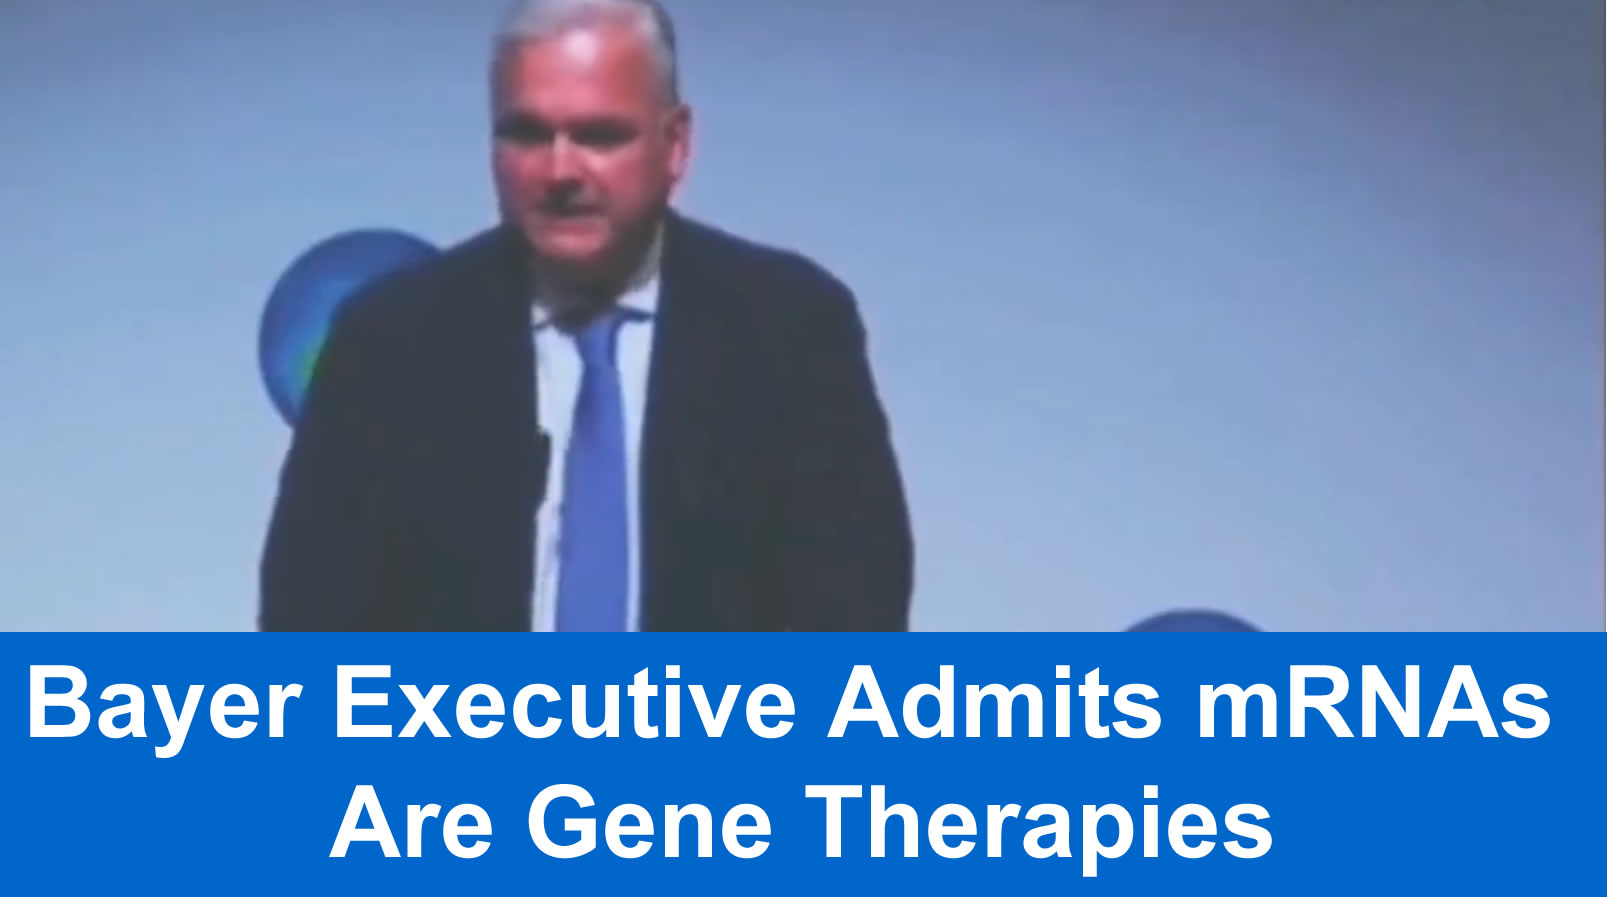 Bayer Executive Admits mRNAs Are Gene Therapies